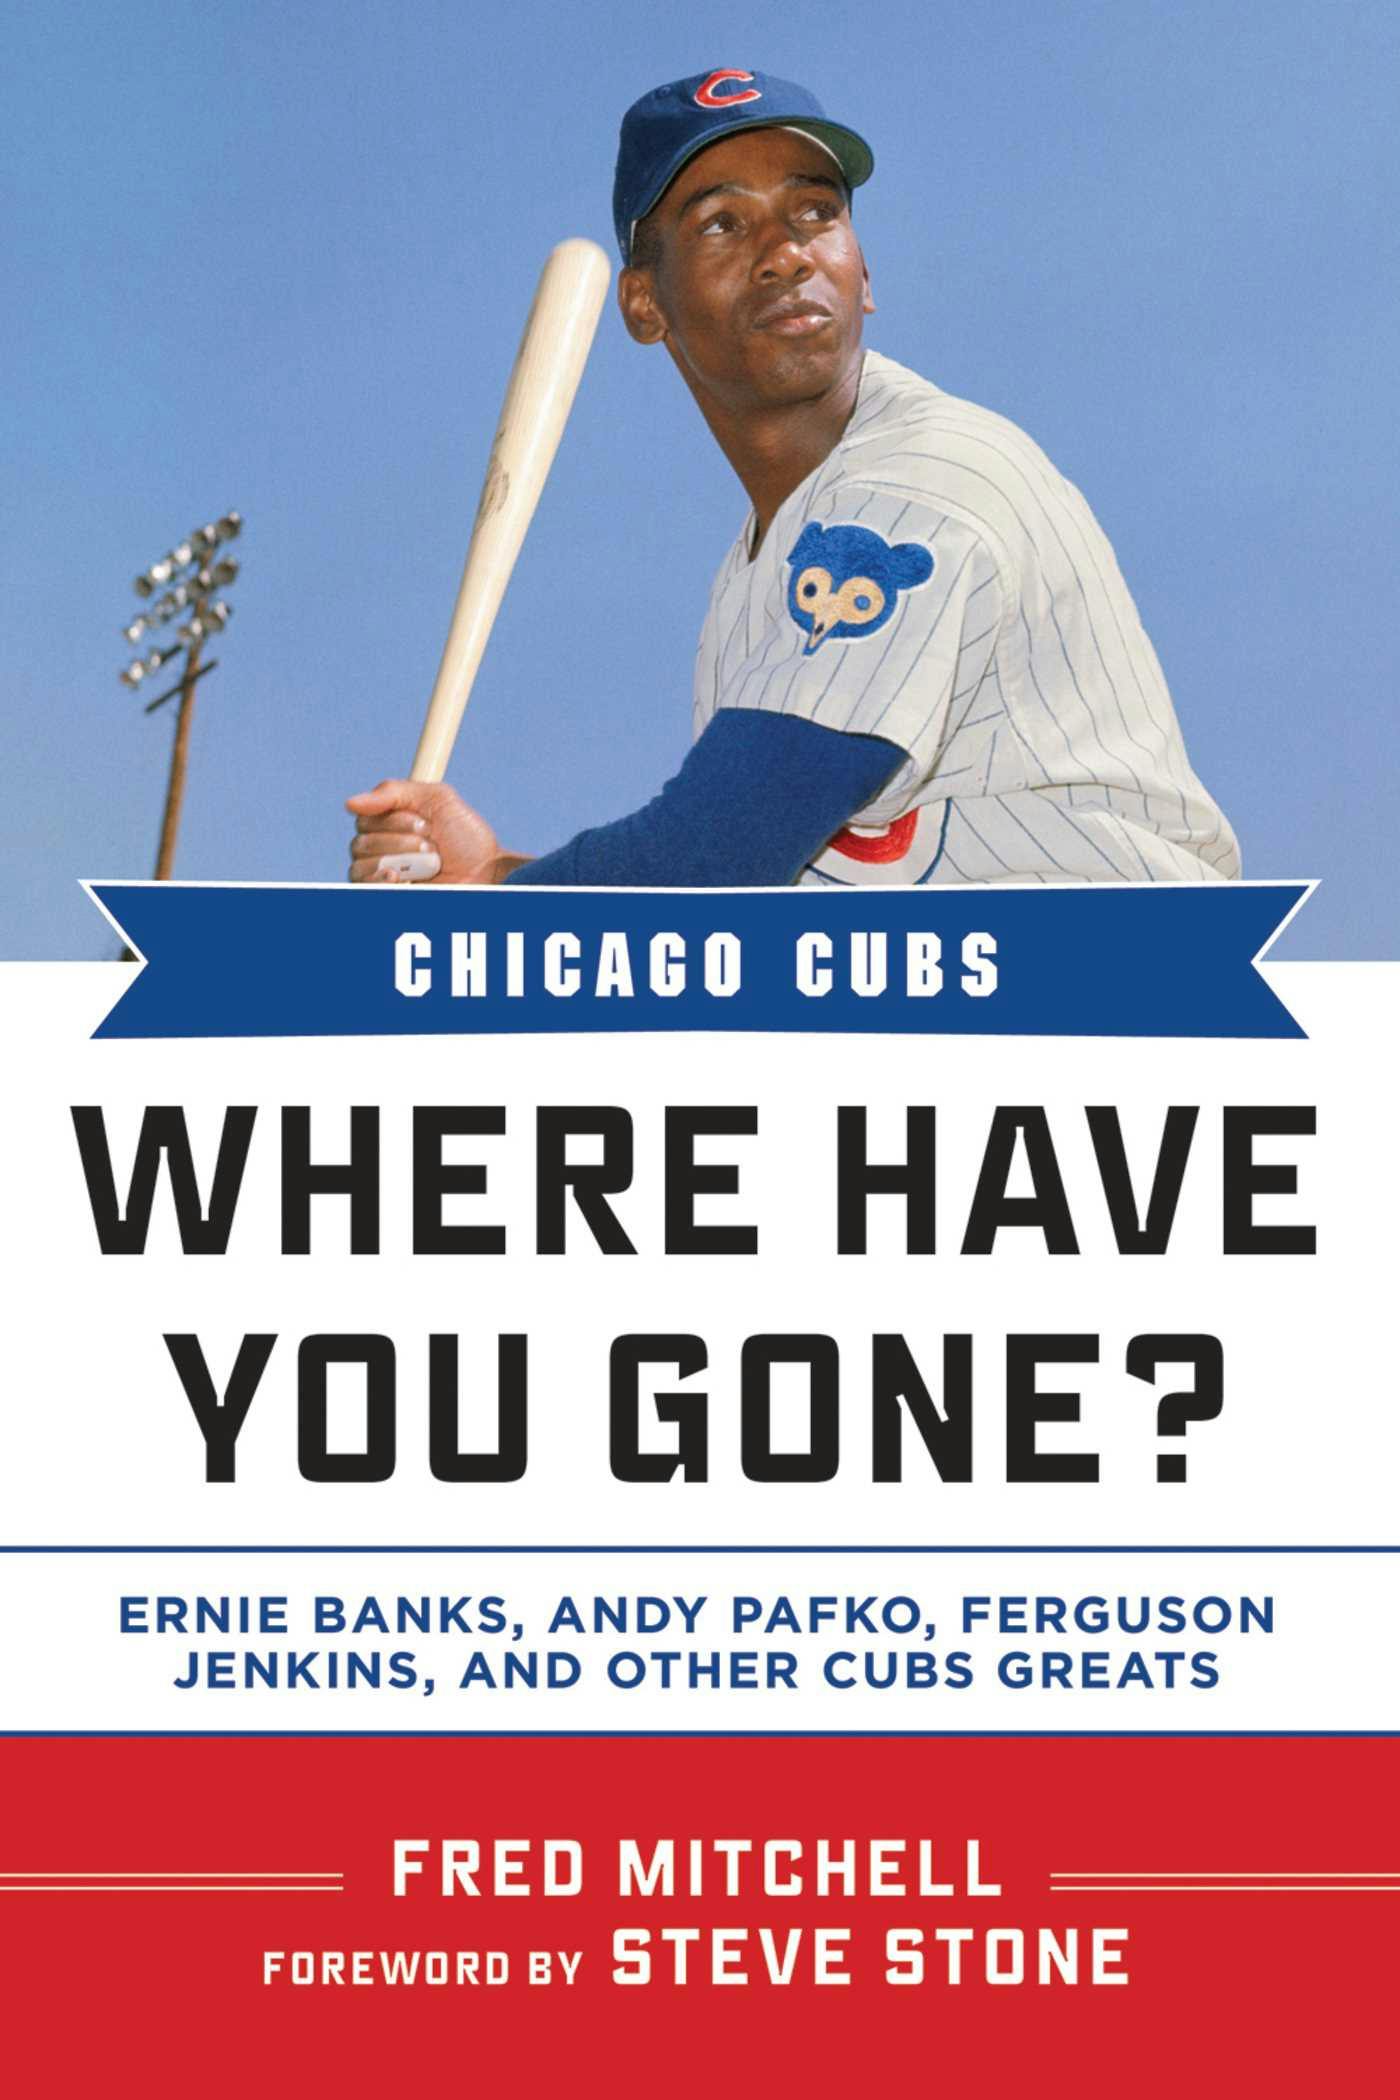 Chicago Cubs: Where Have You Gone? Ernie Banks, Andy Pafko, Ferguson Jenkins, and Other Cubs Greats - undefined